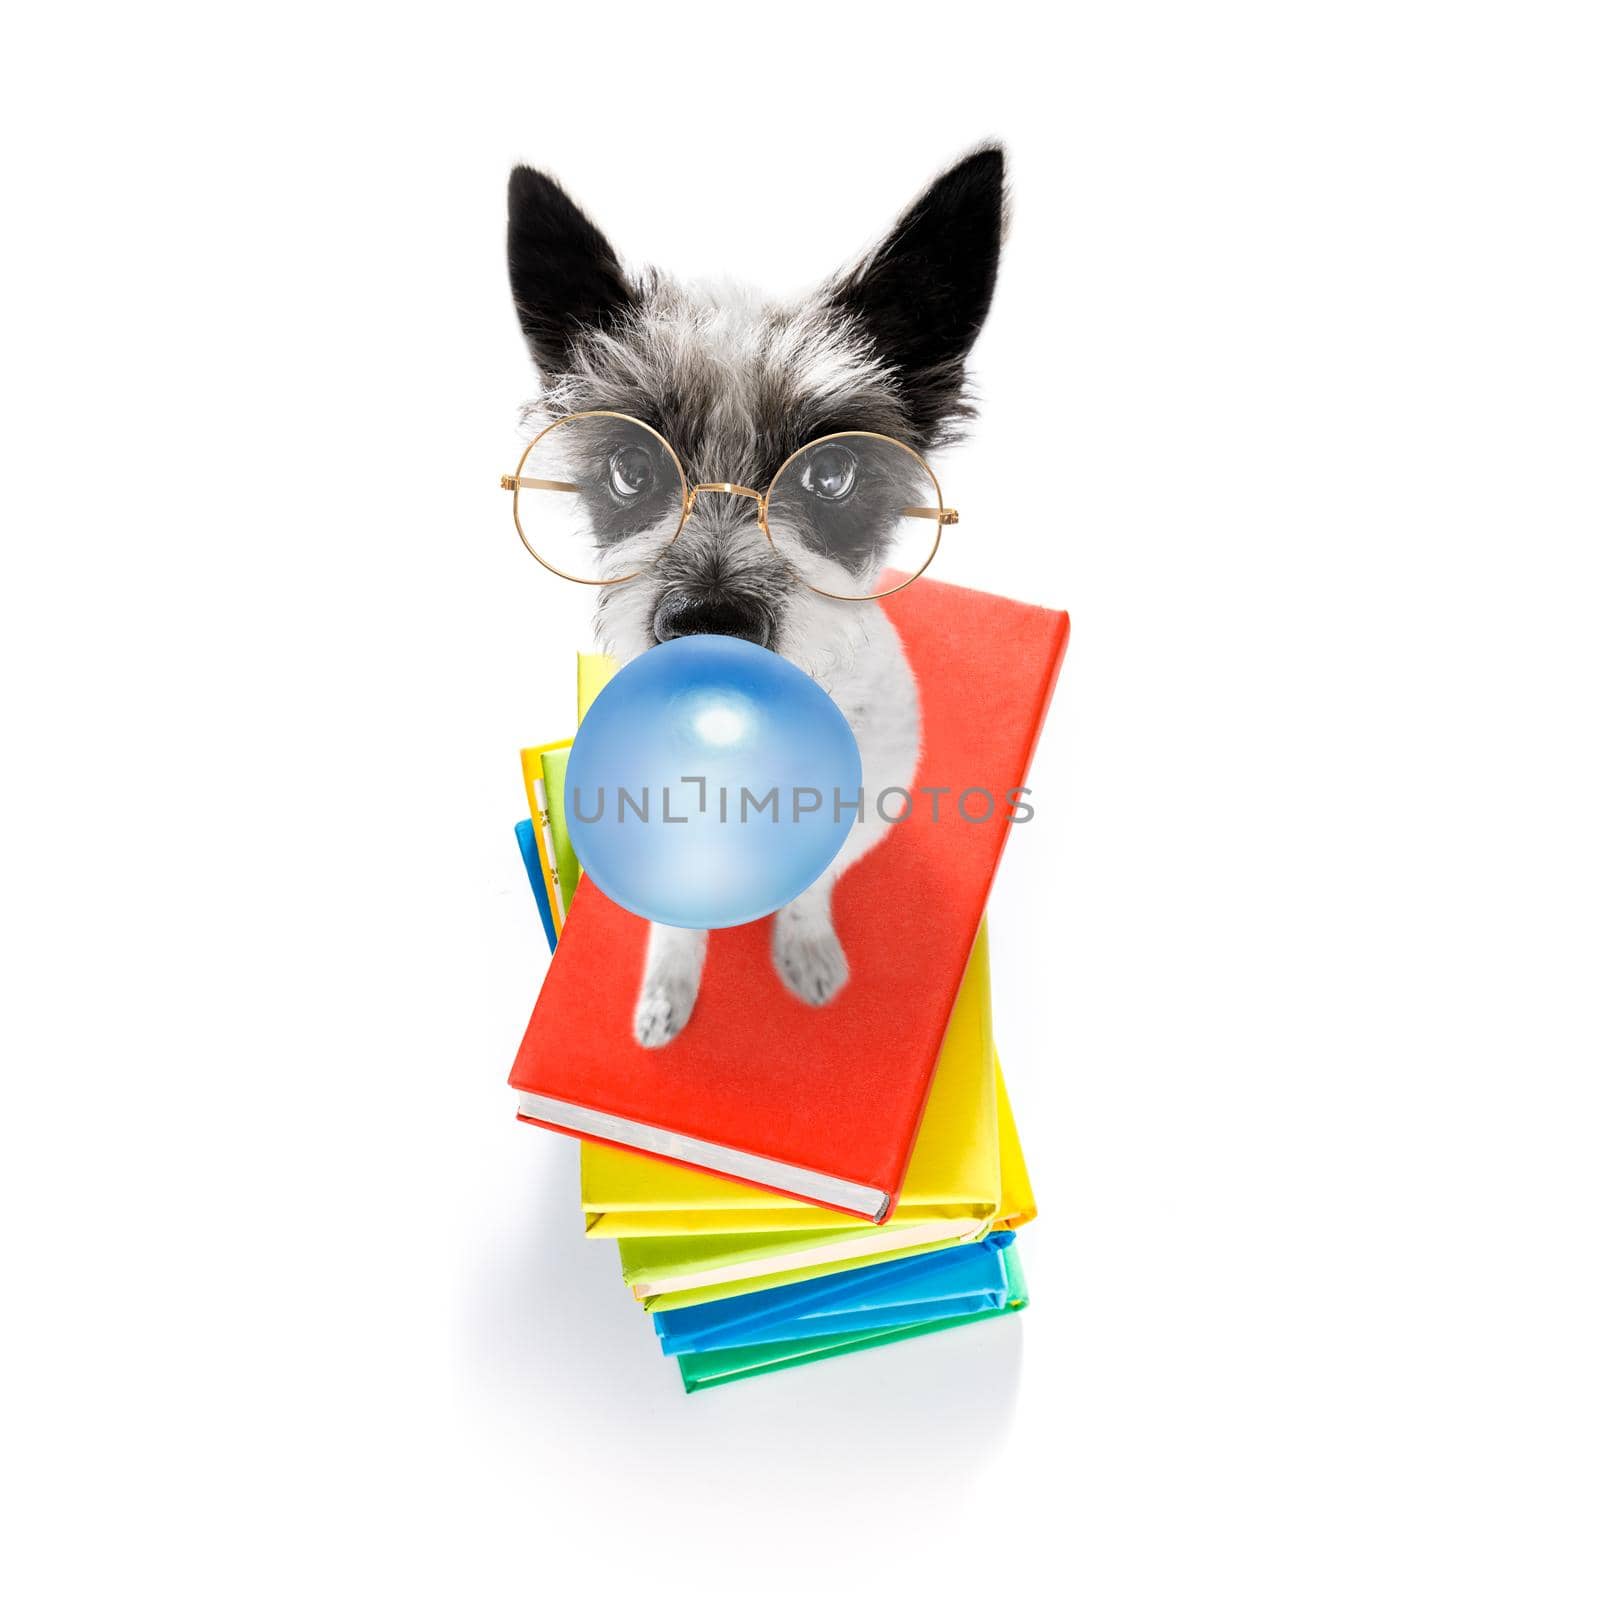 terrier poodle dog with   a tall stack of books ,very smart and clever , isolated on white background, chewing bubble gum